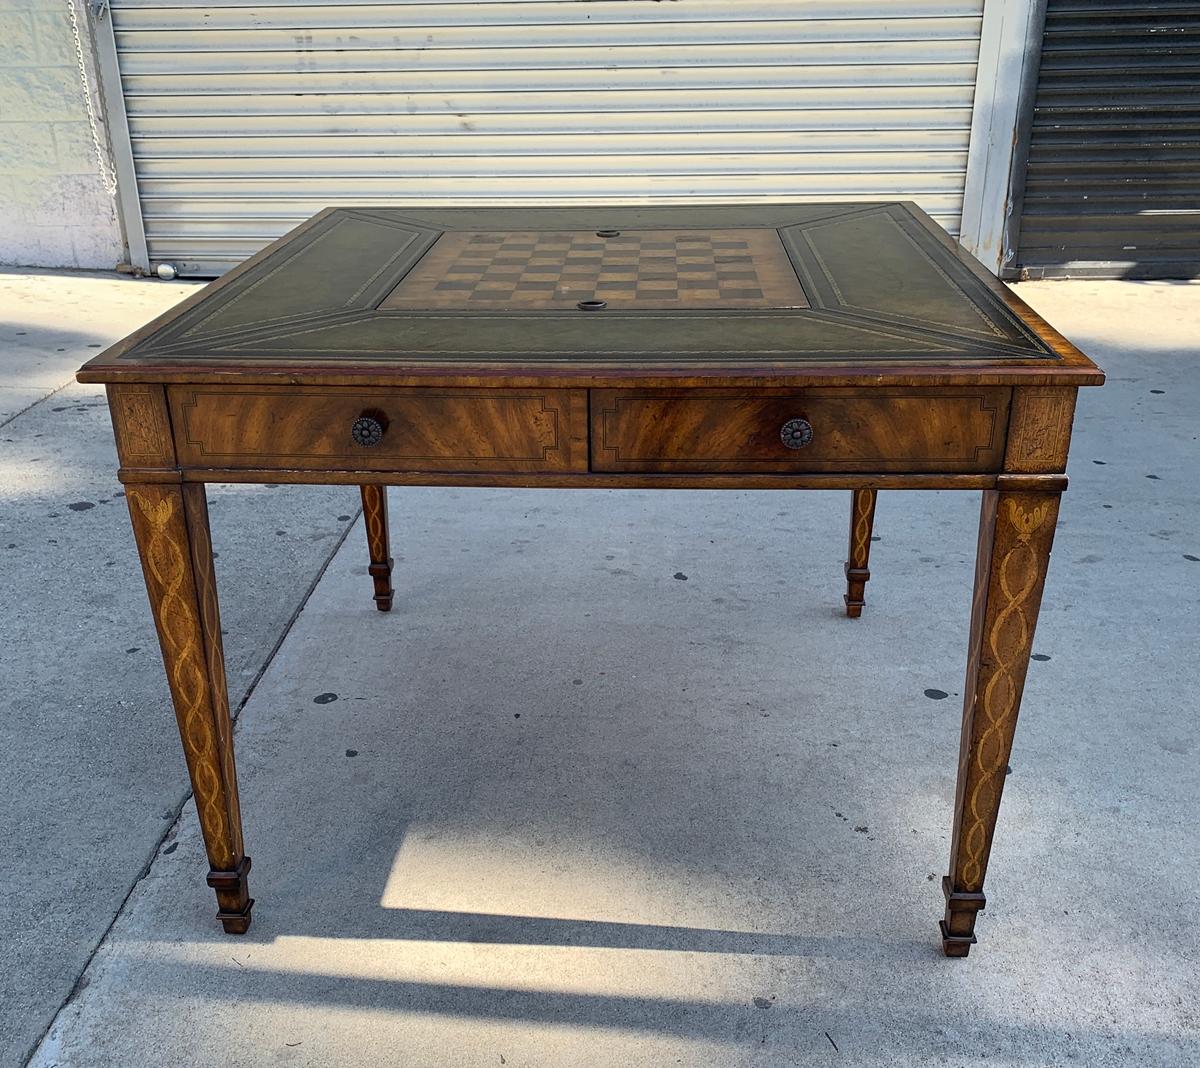 Stunning and beautiful game table wrapped in leather and parquetry detail designed and hand made in the Philippines by Maitland Smith.

The table shows beautifully, the table has 4 drawers, and an inset for chess set.

The piece is in very good